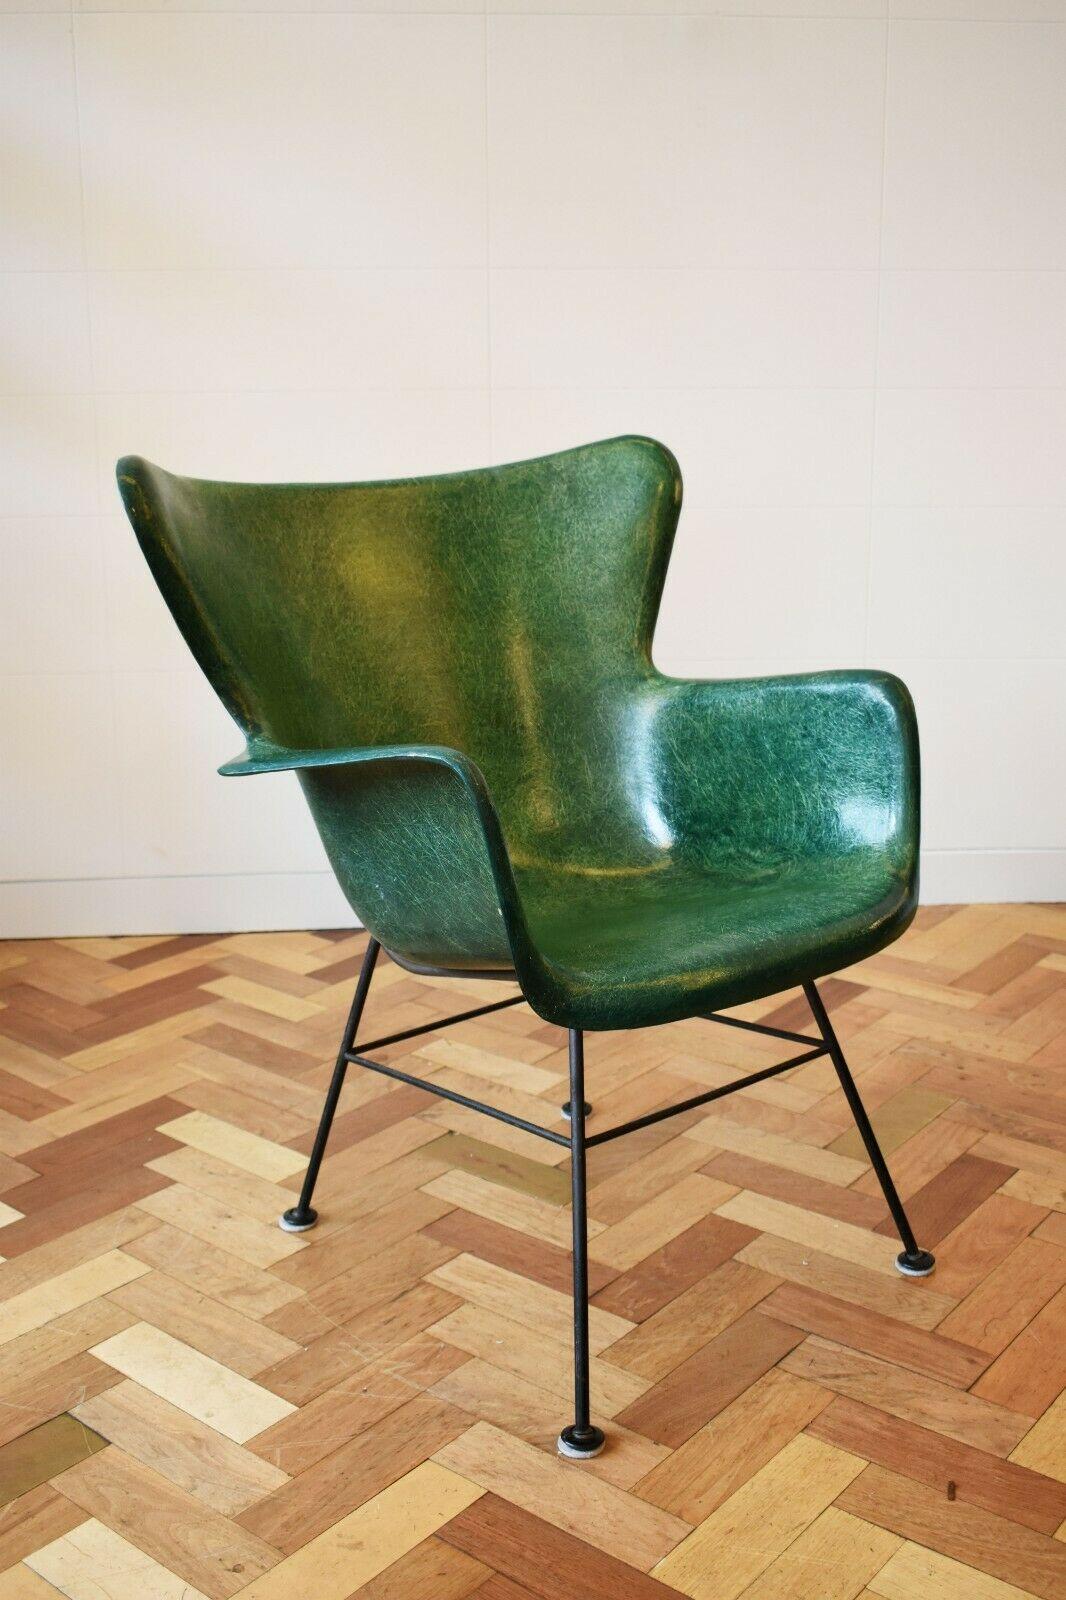 The 1958 Wingback fibreglass chair designed by Lawrence Peabody for Selig.

This piece is a compelling contemporary to the pervasive Eames shell chair, playfully filtered through American Atomic Age Modernism. It is characterised by the single